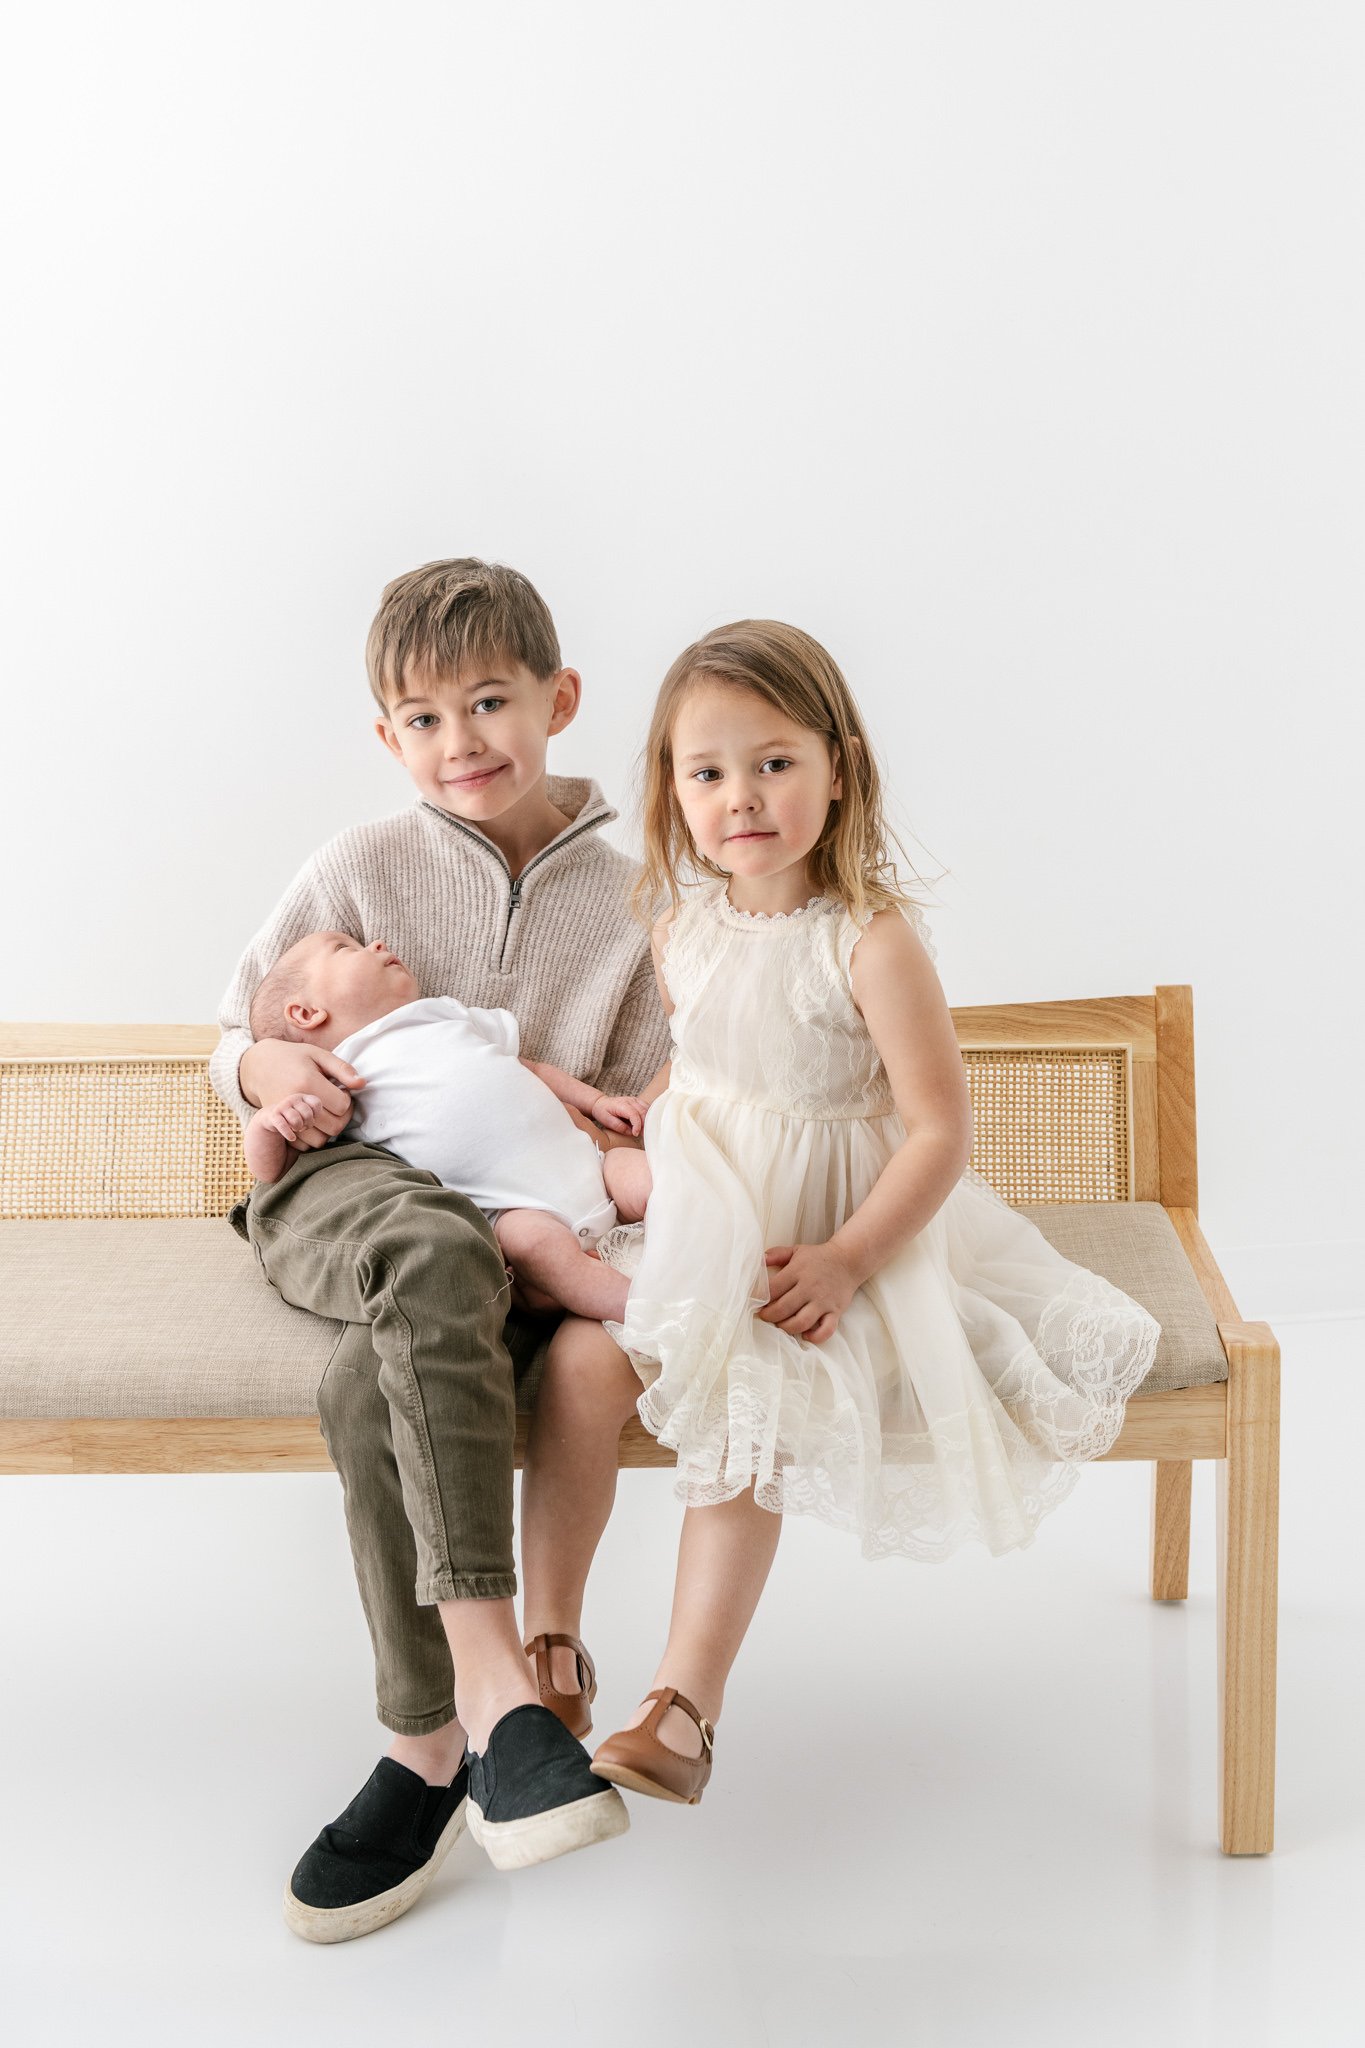  A brother and sister sit on a vintage bench holding their newborn baby sister by Nicole Hawkins Photography. vintage sibling portrait #NicoleHawkinsPhotography #NicoleHawkinsFamily #Newborns #MaplewoodNJ #studiofamilyportraits #modernfamilyportraits